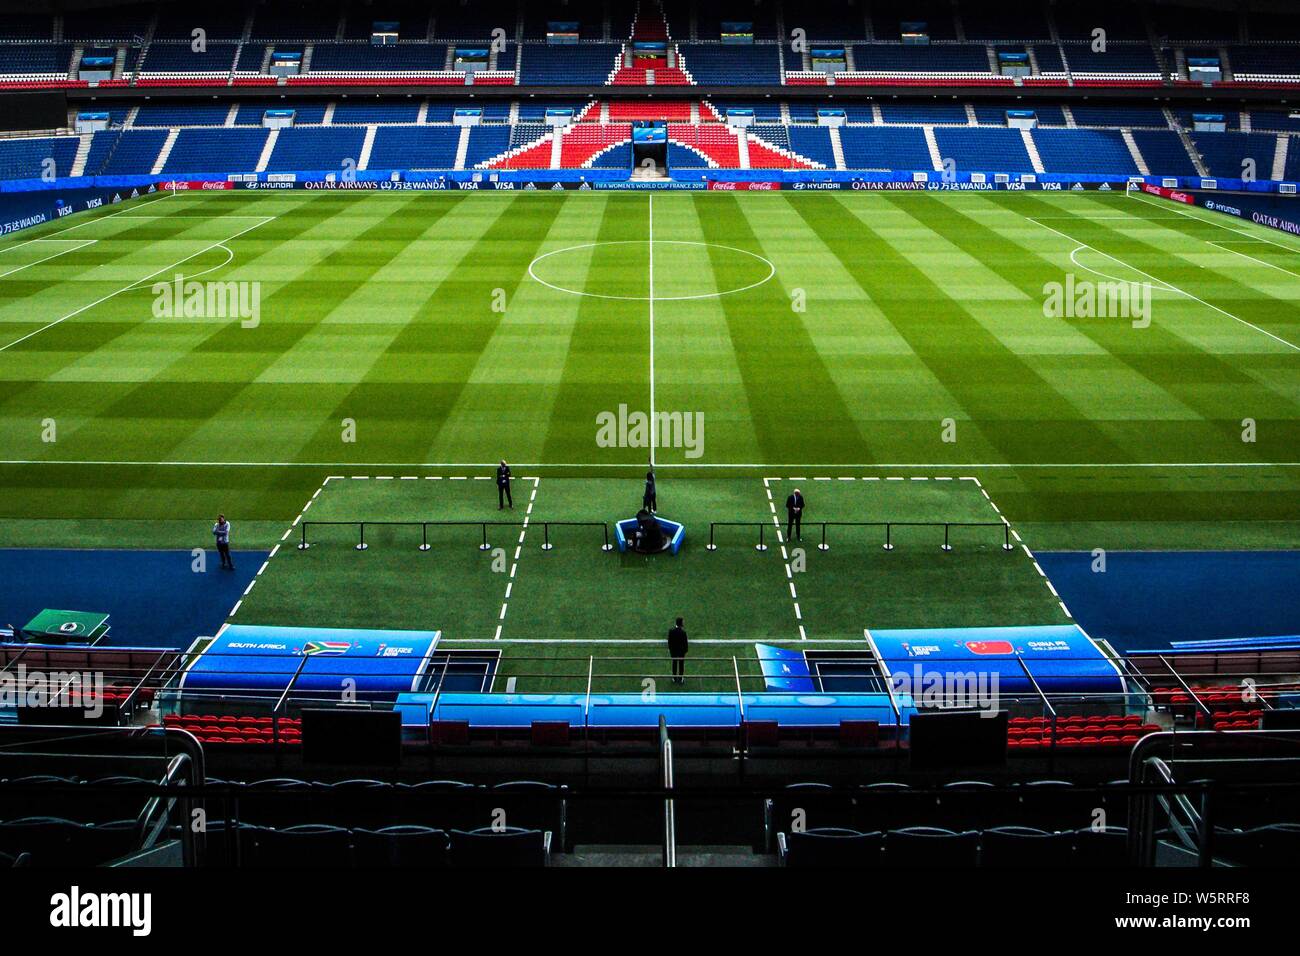 Interior view of the Parc des Princes for the FIFA Women's World Cup France 2019 in Paris, France, 12 June 2019. Stock Photo